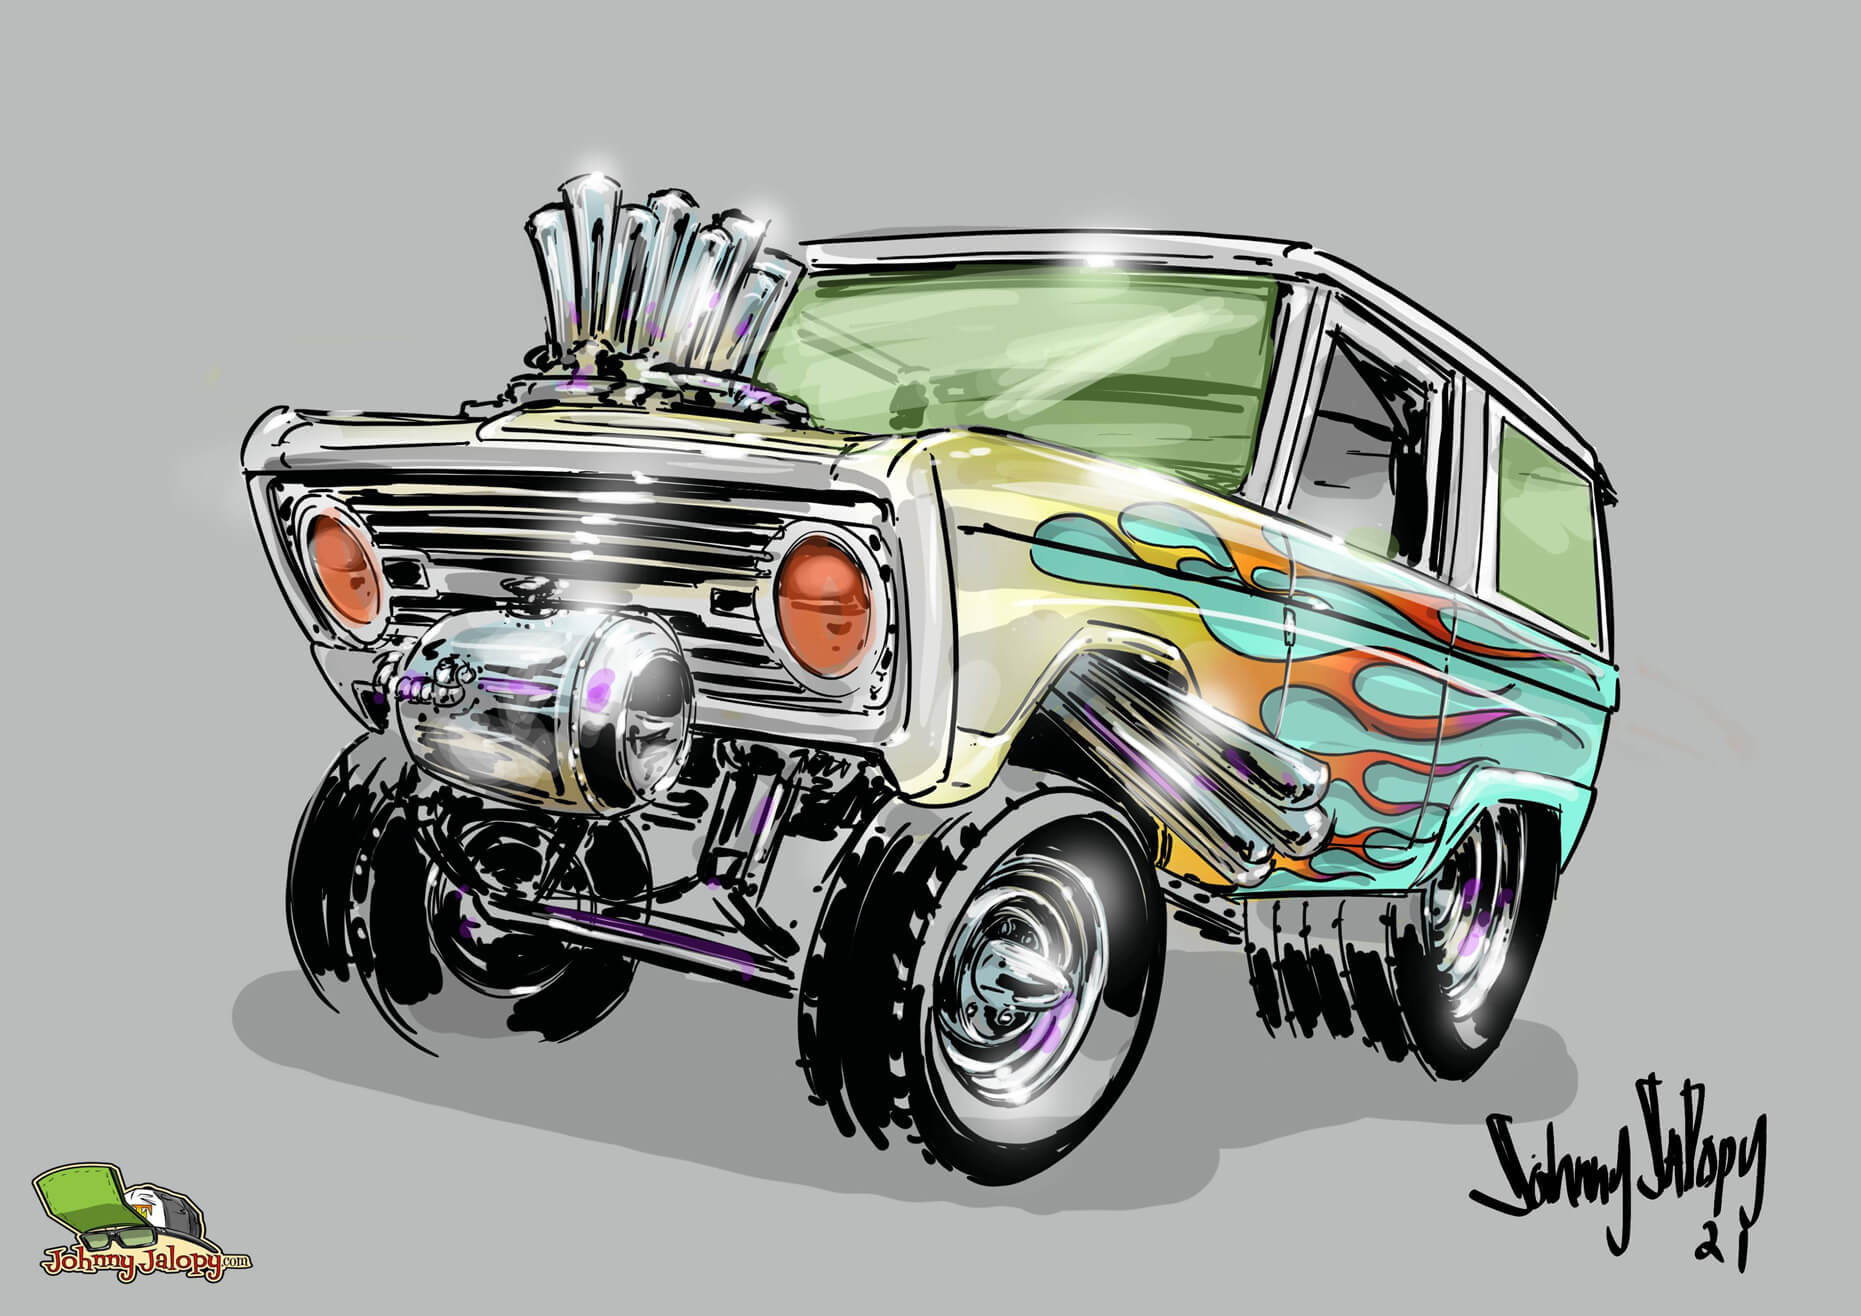 Johnny 5, Space Junkie, Funky Futura From Ventura, Flame Job, Number 5 Is Alive, Bobber Pal, On the Green, Simple Man, 36 Red Ride, 54 Chev Panal, 55 Gasser At night, Rat Mobile, Blue Tone Extracab, 1978 GMC Toon Sepa, Aloha Dave, Army, Art On Wood, Babe, Eye Guy Bagger, Bandit, Beatnik Bandit, Take A Knee, Black Brown 57 Chevy, Black Singal Cab Surf, Bo Huff Tribute, Bo Huff T, Board Tracker, Bobber Toon, Bubble Concepts, Still Plays With Bubbles, Orange Two tone bug, Baby Blue Bug, Bug Red, The Hold up Buick, Buick City, Caddy, 70 Camaro, CCab, COE Kid Jalopy Truck, Chopper B/W, Chop Shop Van, Chopped Custom pink, For Certain T, Flying Eye Chopper, Chopper Dude, Chopped VW Gray, City Run, C10 Gray, Color Motion, The VW Hang Out, Concept Bubble top, Custom cruiser Bubble Top, Corvair Surfs Up, Corvanning, Minty Fresh Buggy, Stung, Lets GO!, Da Weeds, Inline is fine!, Crazy Rails, lucky 7, Buggy Fun, Red Wings, Evil Drag New Color Crazy, Eye Guy bucket, his EYE is on YOU!, Made In, Frosty VW, Five Window Surf, Showing Scars Surf Rod, Flying A, Later!, Up high, Frankie in da Bucket, Frankie Hard, Franky Big T, Frantic Final Driver, Full Color Print, Garage 1, Garage A, Gas Bubble, Gas Up, Gold Nugget, Gray Grill, Green City Speeder, Green Light, Half And Half, Hang Lose, Harly Bobber, Hauling Bucket, Home Brew TShort, HRWC, Insecurity, Jalopy Wiskey Truck, Jalopy Hooker, Jimmy Fishbone, JJ Monster, Kid Jalopy, Kid Jalopy Farlane, Kid Jalopy Fleetline, Kid Jalopy Rockhell Sidekick, Patina Blue Bug, Rusty Patina Volksrod, Gray A, White Impala, Let's roll, Black Beauty, Lost And Found, Lowtide Guy, Mahalo Hut, Mahuling, Model A Gray, Mustang Bill, Purple Elco, Ghia, Red Rum, Surf Bucket, Volksrods Rock, Who's Next, Old Skate Dude, Old Time, On Fire!, Orange T, Orange Bobber Kool, PBR, Polo Loco, Rail Job Fire, Rat Bug Flying, Primer Volksrod, Traditional Rat, Rattastic, Ruby Dub, Red Convertible, Red Rat Bike, Teal Time, Ripping It Up, Rixshaw, Rock Star, The Rod punk, Roth hauler, Rowe, Royal Purple, Sepa Zepher, Side Car, Skate Dude Black, Skate Dude Surf Truck, Skeleton Rider, Skull Rider, Red Sled, Slunglow, das Volksrod, Space Junkie Toon, Space Junkie II Concept, Space Rod, Spike, Notchback Toon, Stripper, Surf Deluxe, Surf Brother, Tiki Bus, Surf Bum, Pearl Gold, Zombie Squad, Surf Fink, Red Ford, Teal Surf Ford, Surf Freak, Surf Internatinal, Surf Is Up, Surf 'N Dude, Surf Rods, Blue Pencil T, Surf Wax, Yellow T-Bucket, The Belly, The Driver, The Drive, The Race, The Rose, The Tall A, Thing, Tiki Dreams, The Legend, Barn Finds, Trike, Lights On, The Sepa T, VW Draggster, Vintage Speed Shop, Volksrod Tiki, VW 70 Rag Top Green, Rusty Bus, The Sand Bus, Mint VW Ghia, Rags On Bags, Patina Bus, Spot On, Chopper Transport, Rolling Down 66, Loaded Up, WASP, Want You, Hollywood Knights, Coors Ride, Zombie Rider, Crap it's Thursday